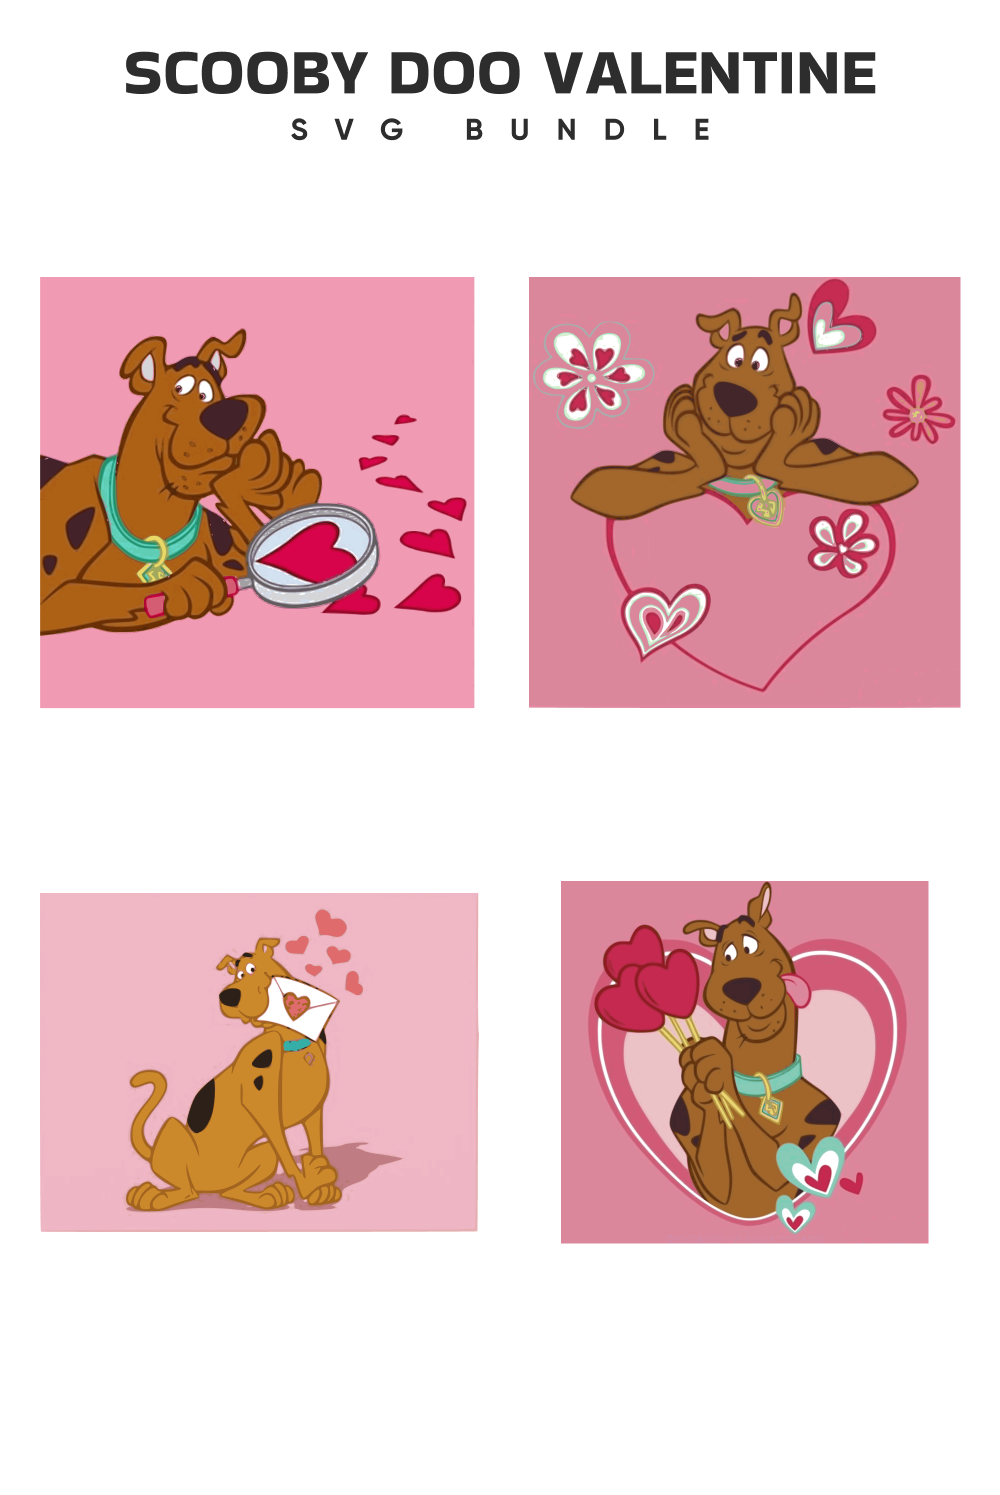 So colorful pink Scooby Doo to Valentines.